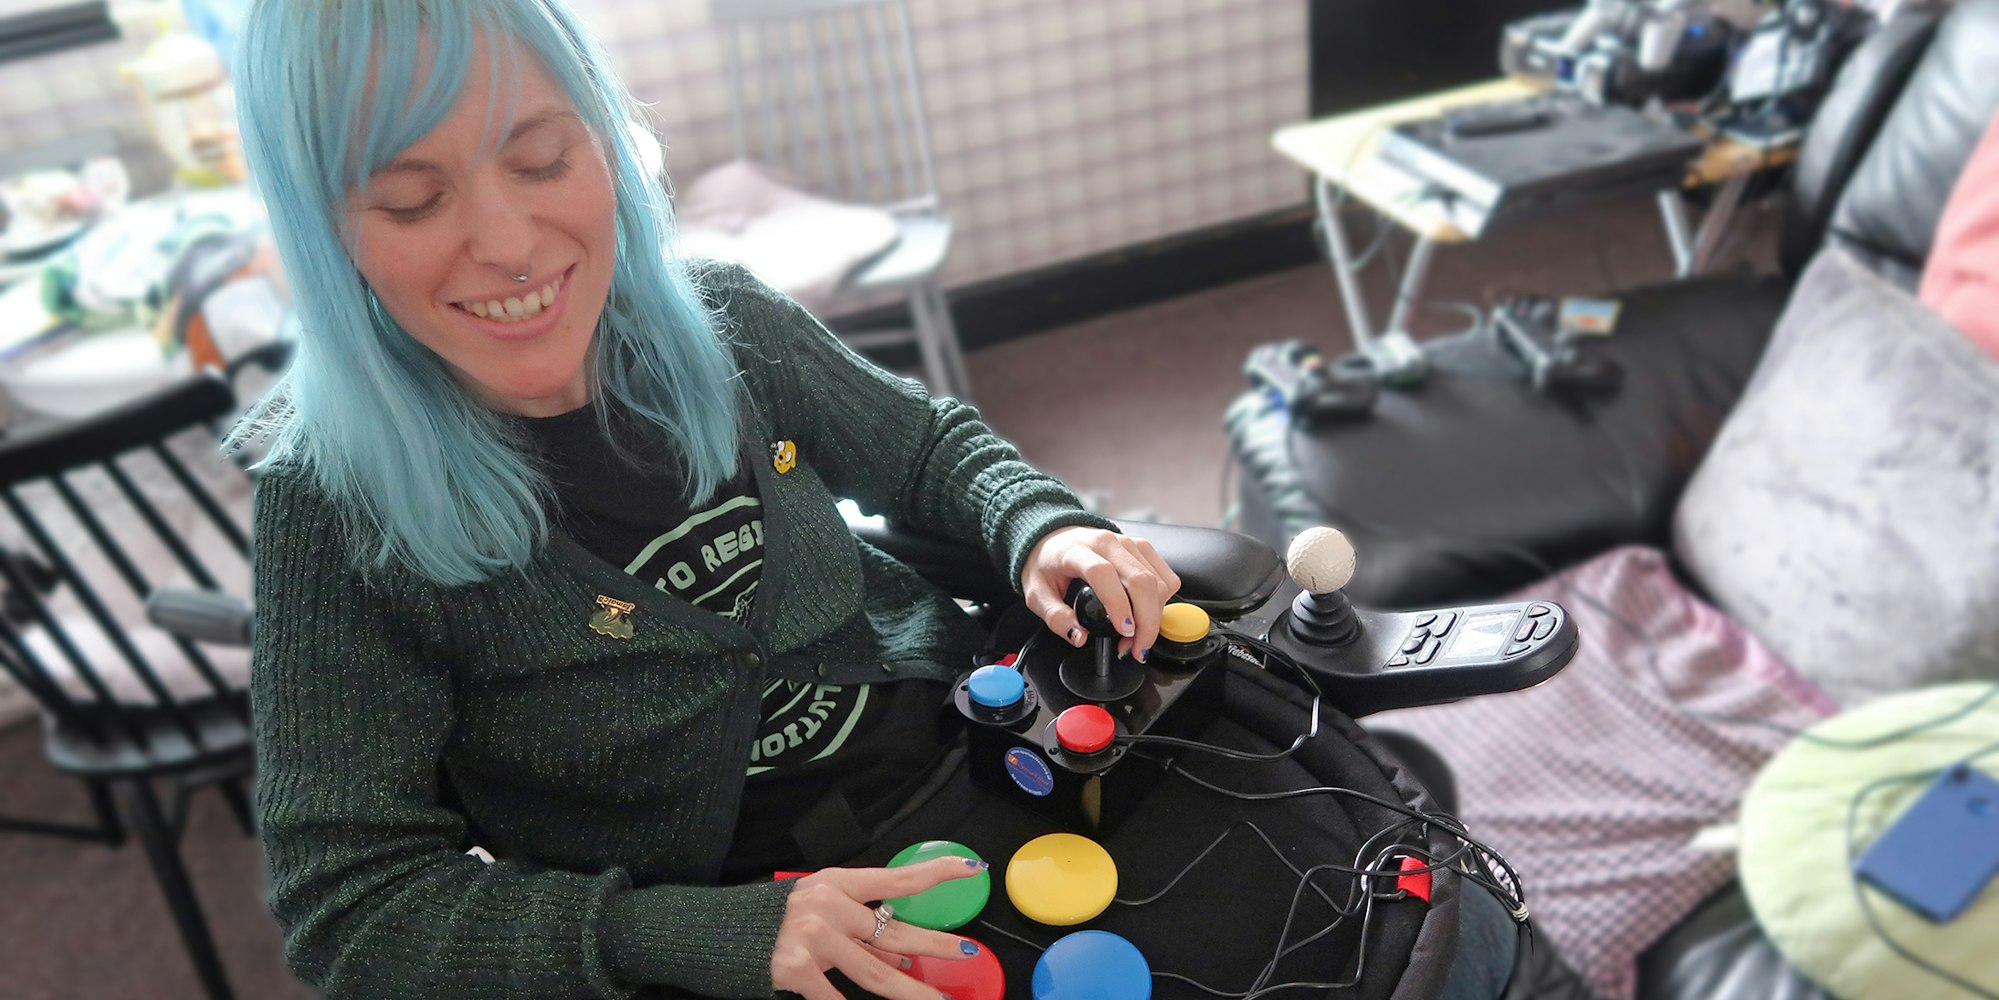 a lady with blue hair plays with a selection of brightly coloured buttons on a pad on her lap